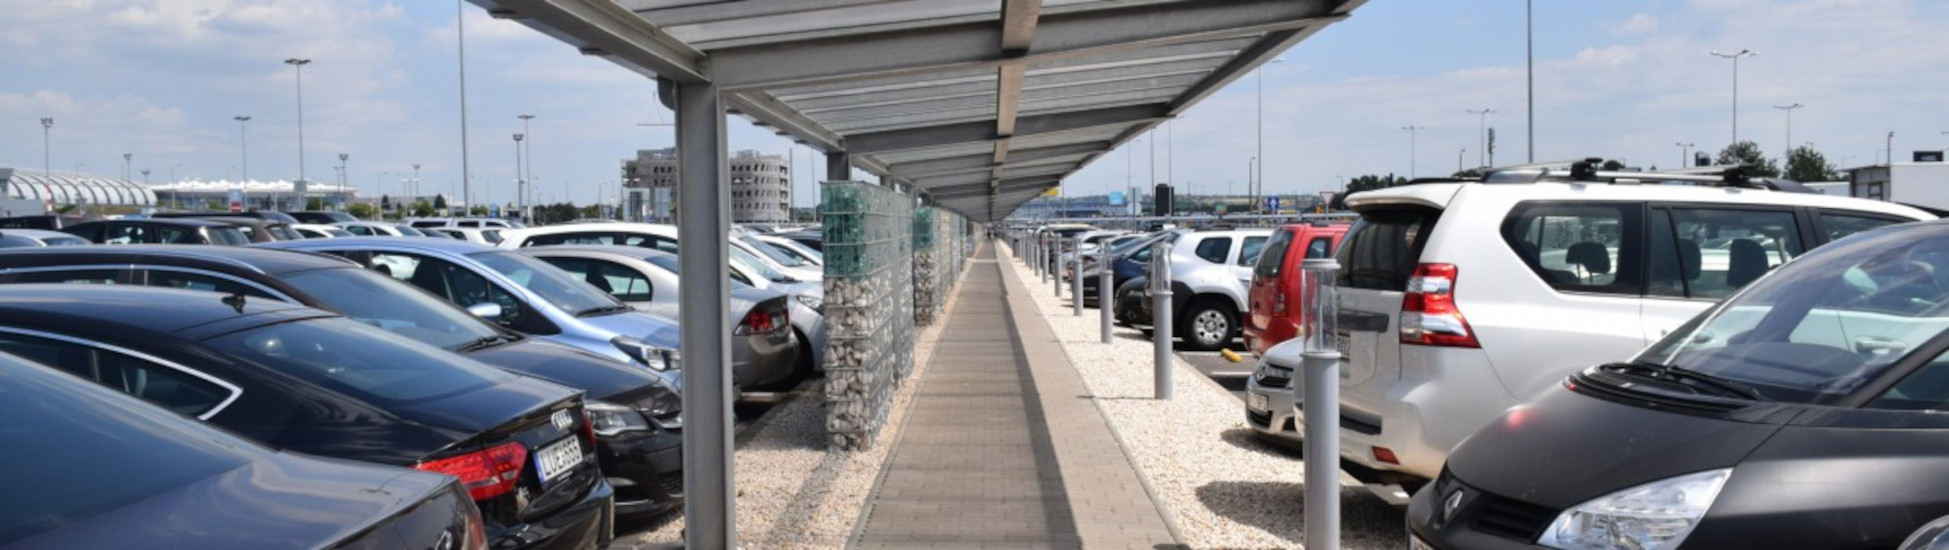 'Holiday Parking Lite' Now Operates as 'Smart Parking' at Budapest Airport